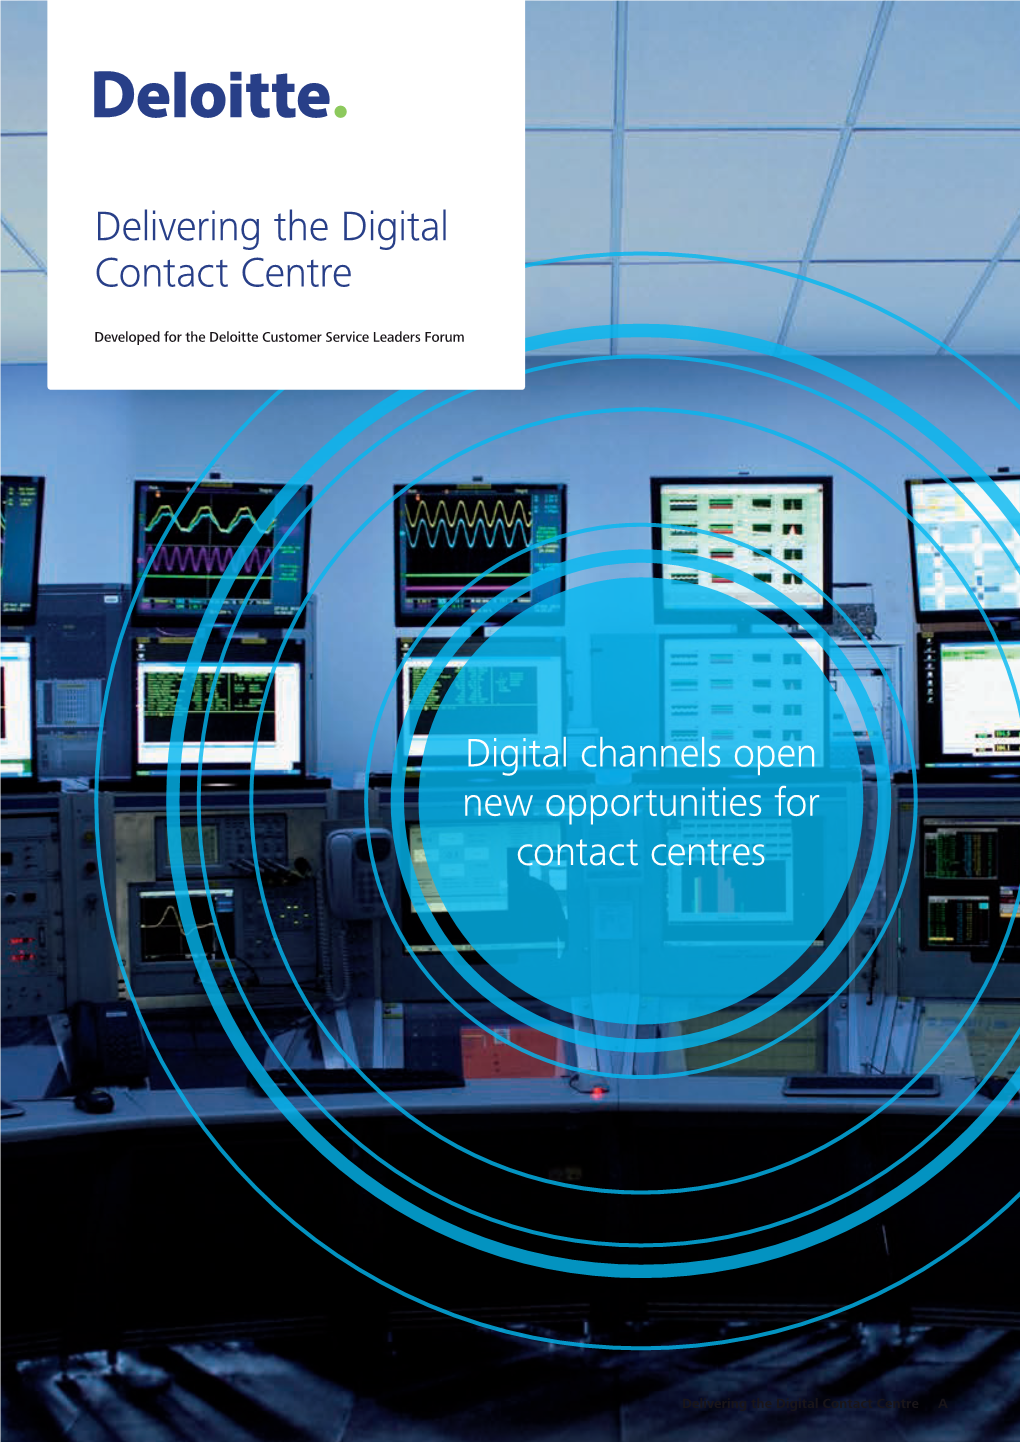 Delivering the Digital Contact Centre